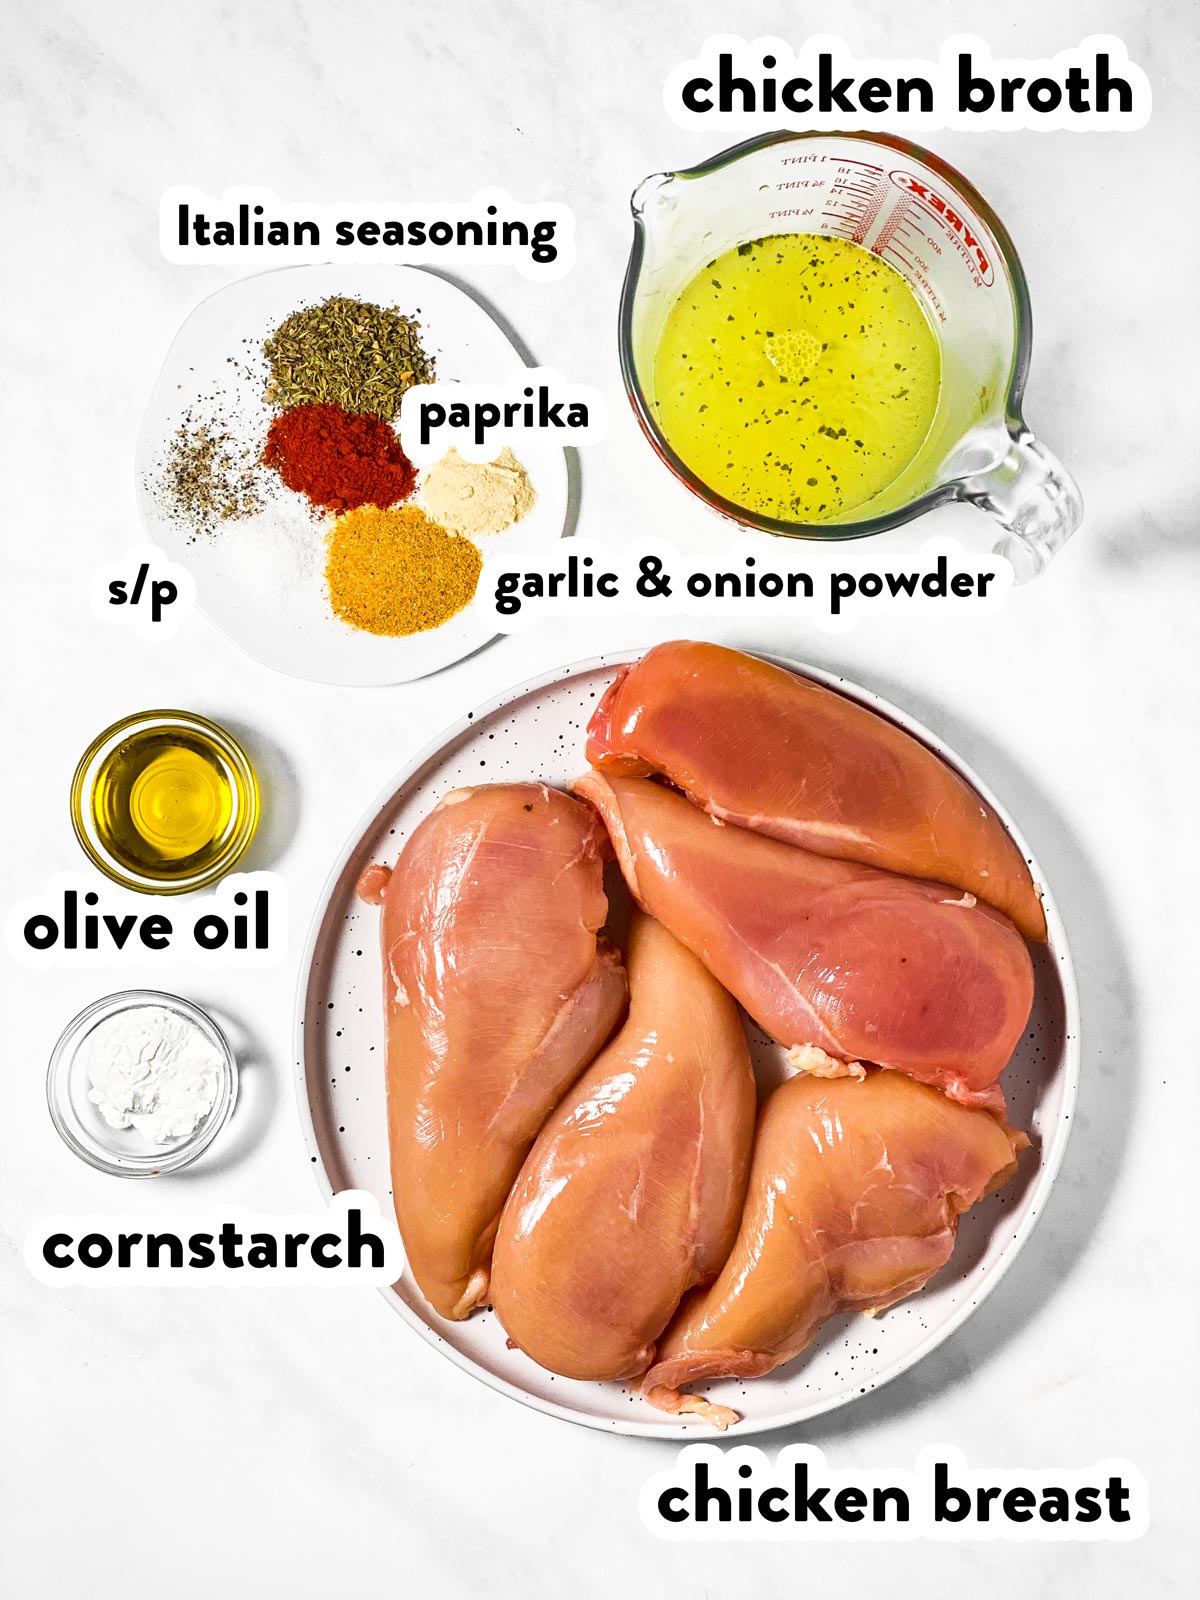 ingredients for instant pot chicken breast with text labels